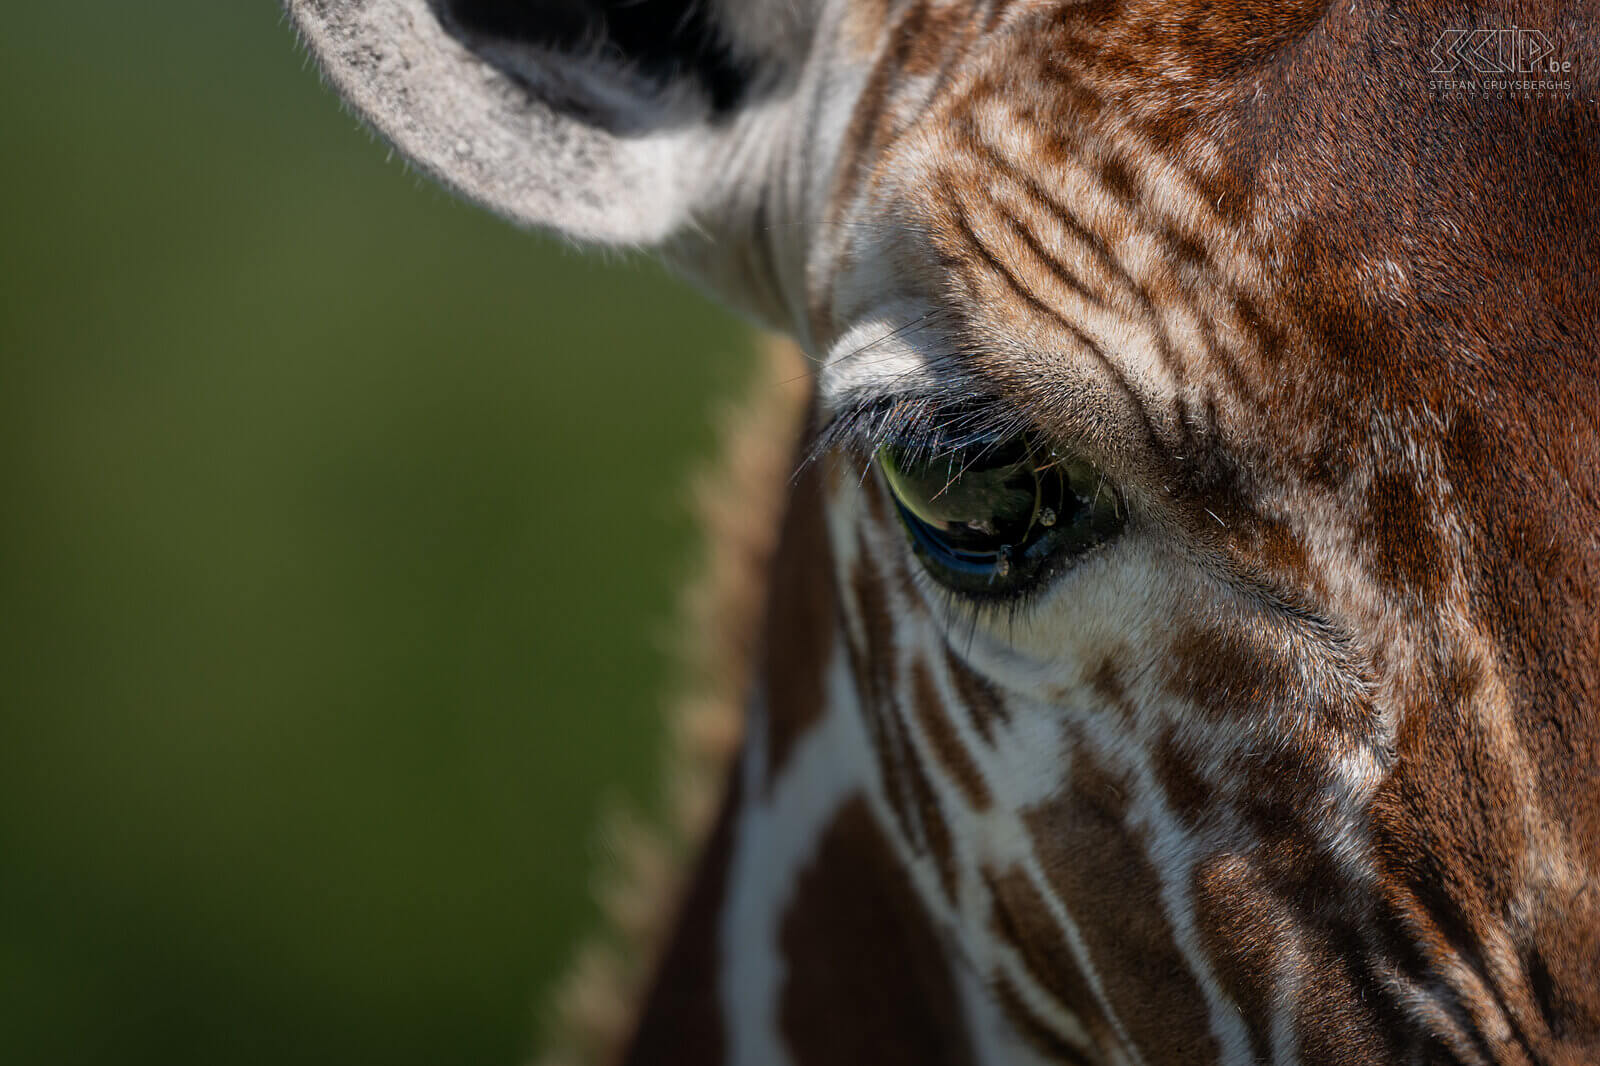 Solio - Close-up reticulated giraffe The reticulated giraffe is a subspecies of giraffe native to Somalia, southern Ethiopia and northern Kenya. Stefan Cruysberghs